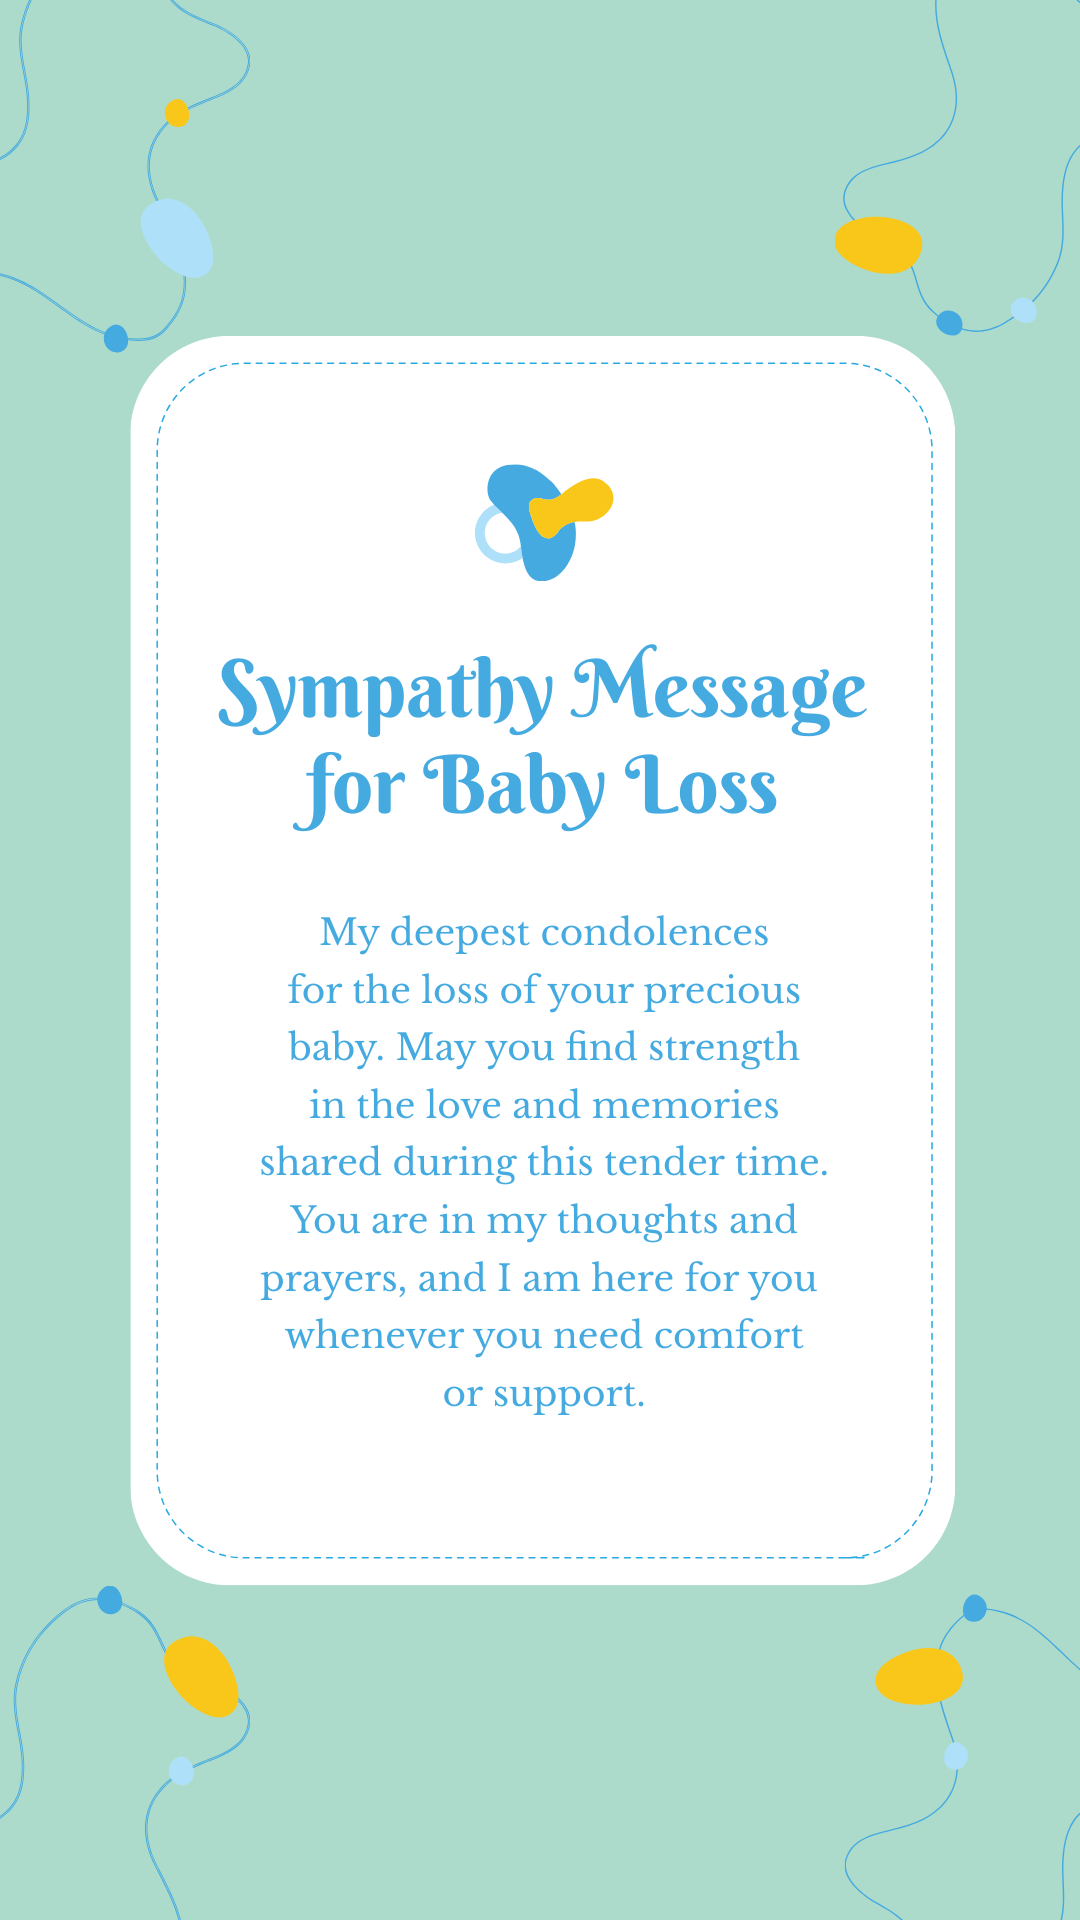 Sympathy Message for Baby Loss